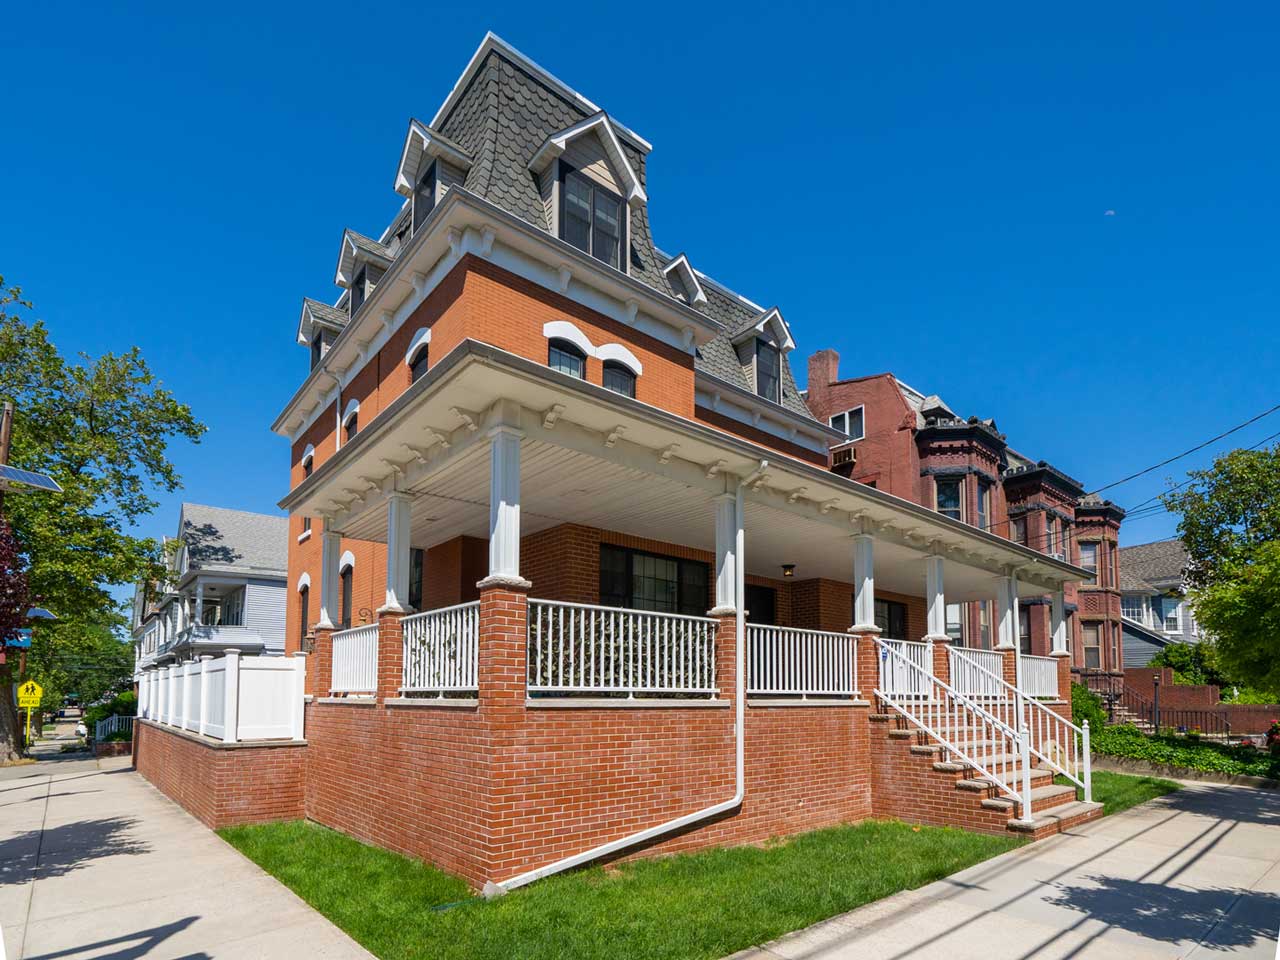 105 West 8th Street Historic Mansion For Sale Bayonne 1